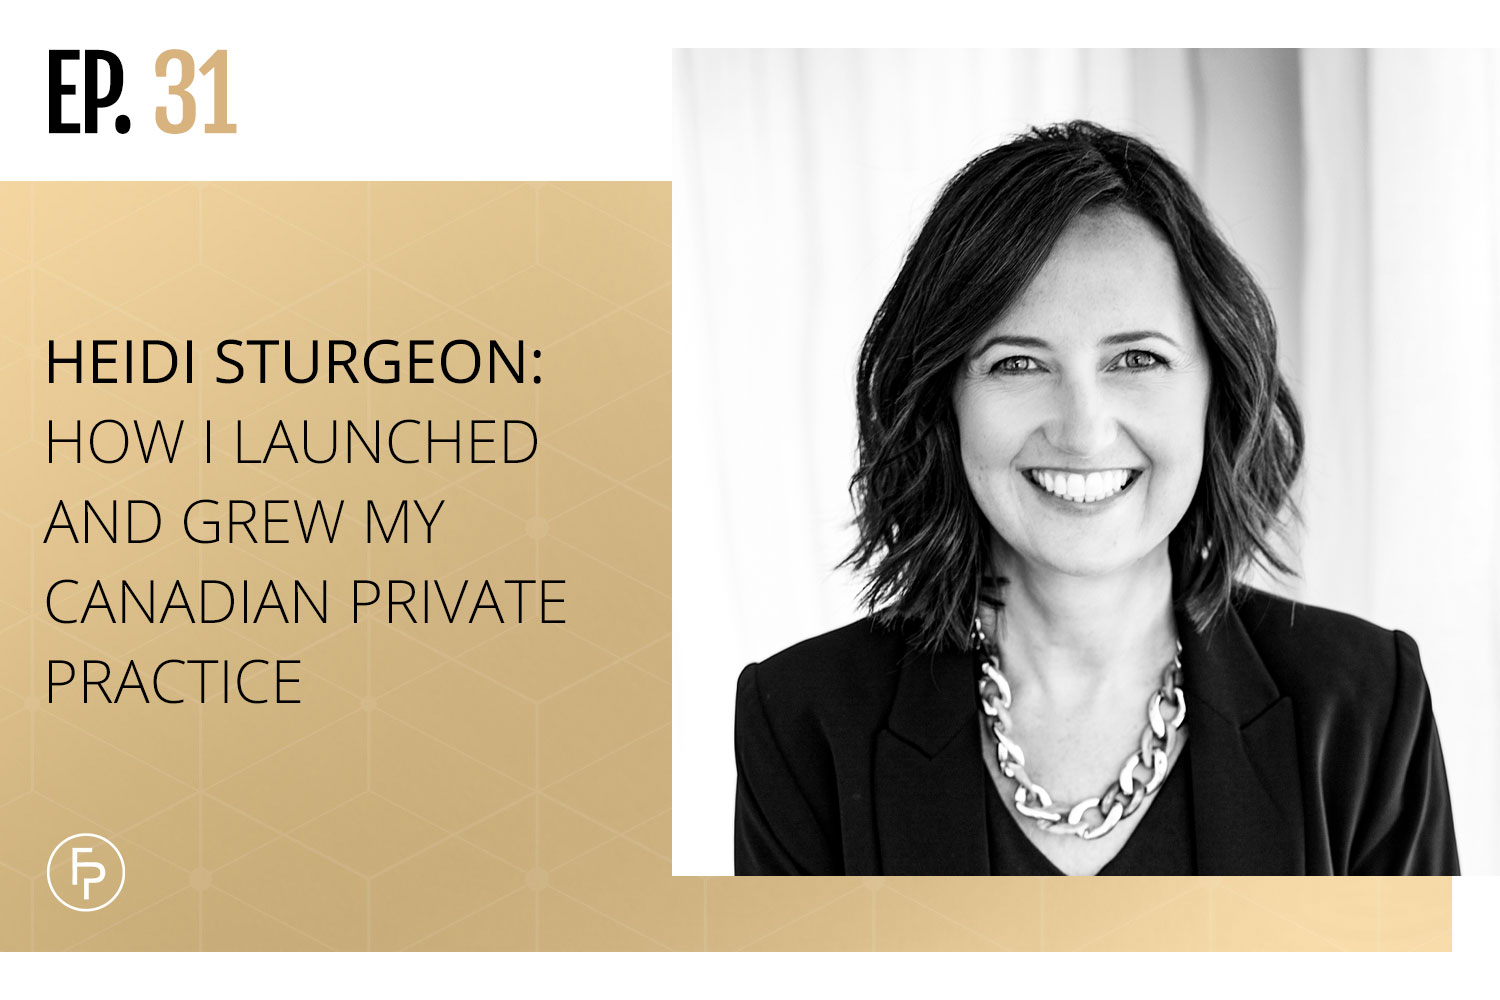 Heidi Sturgeon: How I Launched and Grew My Canadian Private Practice | EP 31